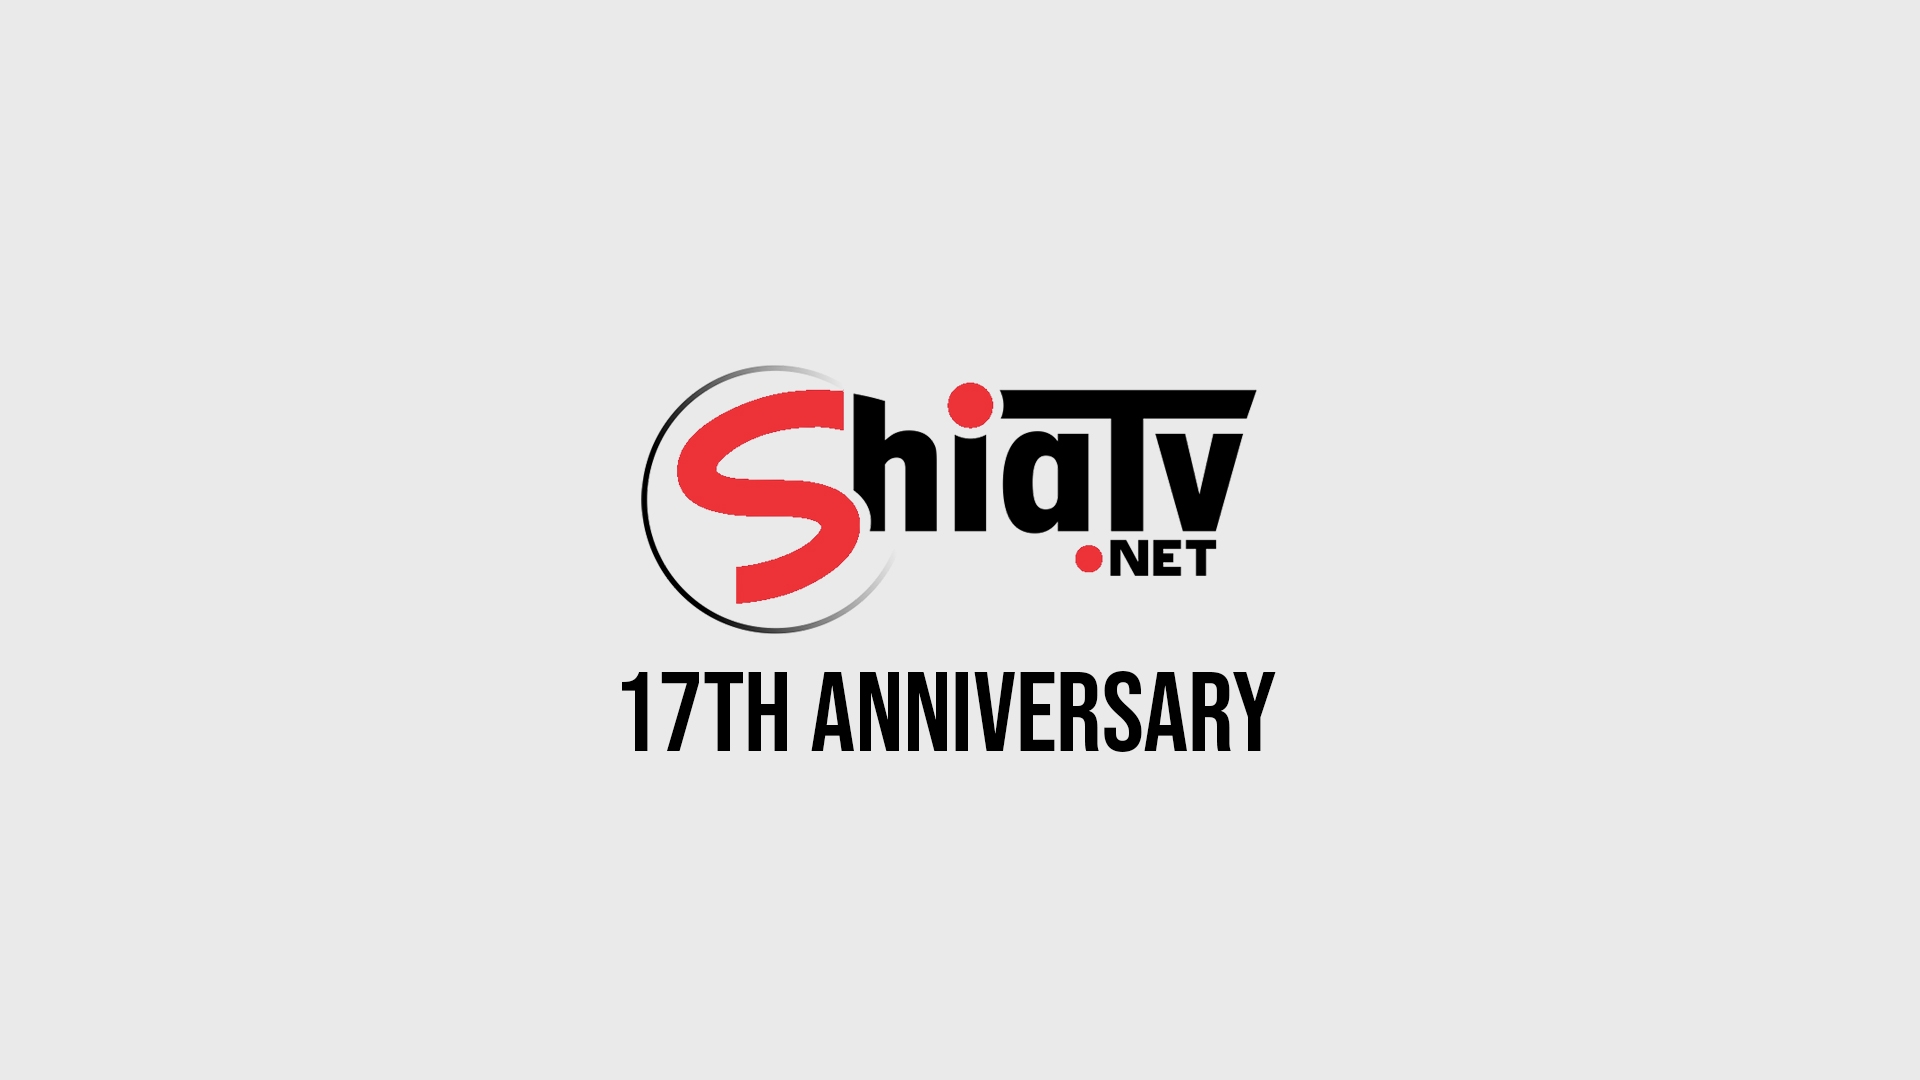 15 Shaaban Felicitations and 17th Anniversary of SHIATV.net | All Languages